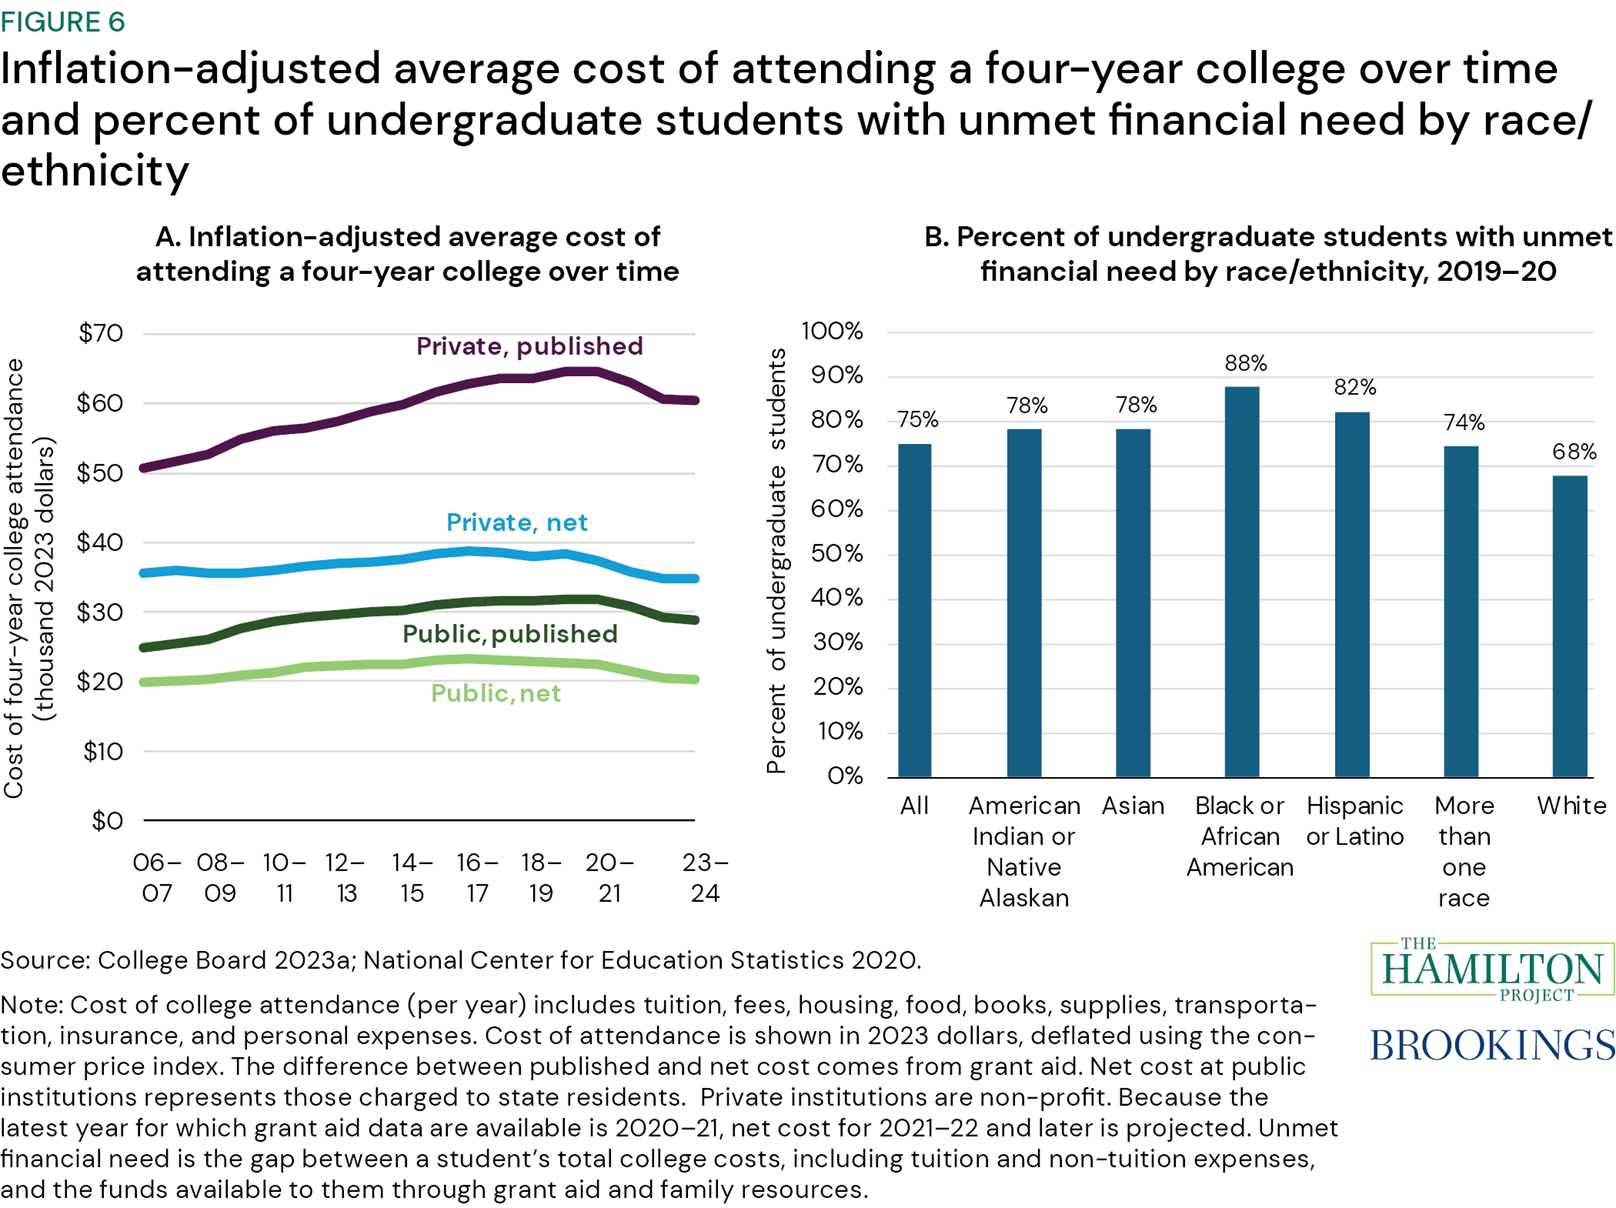 Figure 6: Inflation-adjusted average cost of attending a four-year college over time and percent of undergraduate students with unmet financial need by race/ethnicity